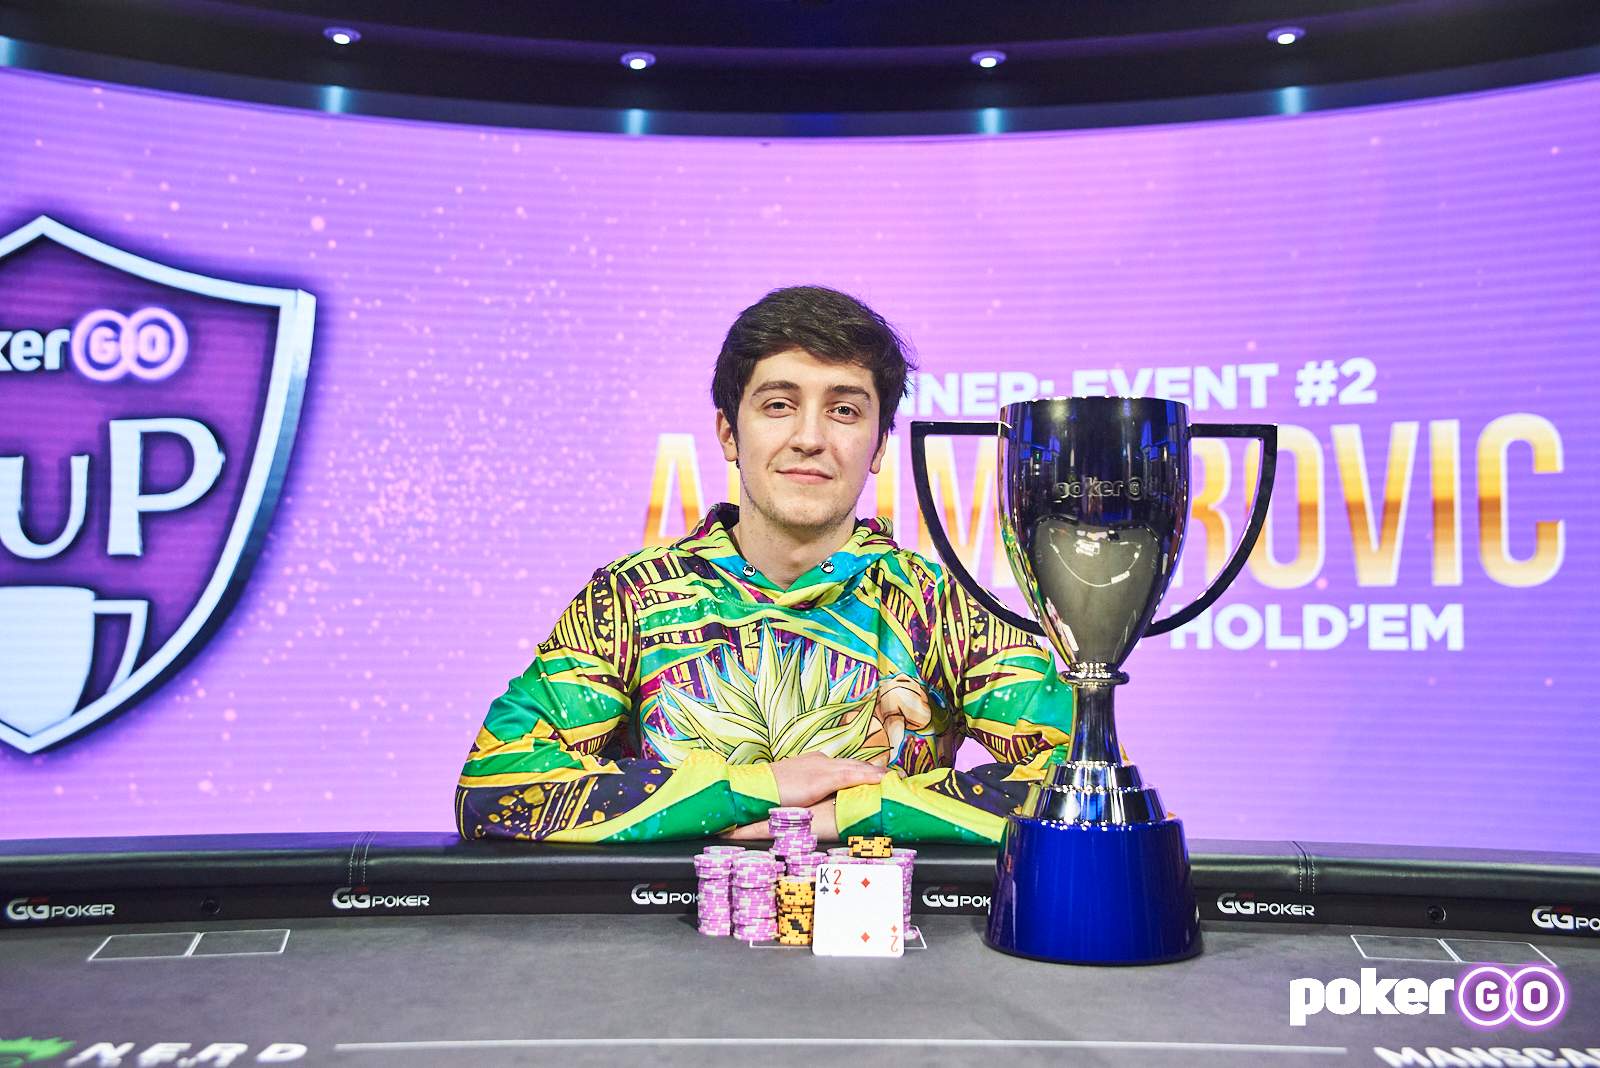 Ali Imsirovic Takes Second Event of First-Ever PokerGO Cup for $183,000